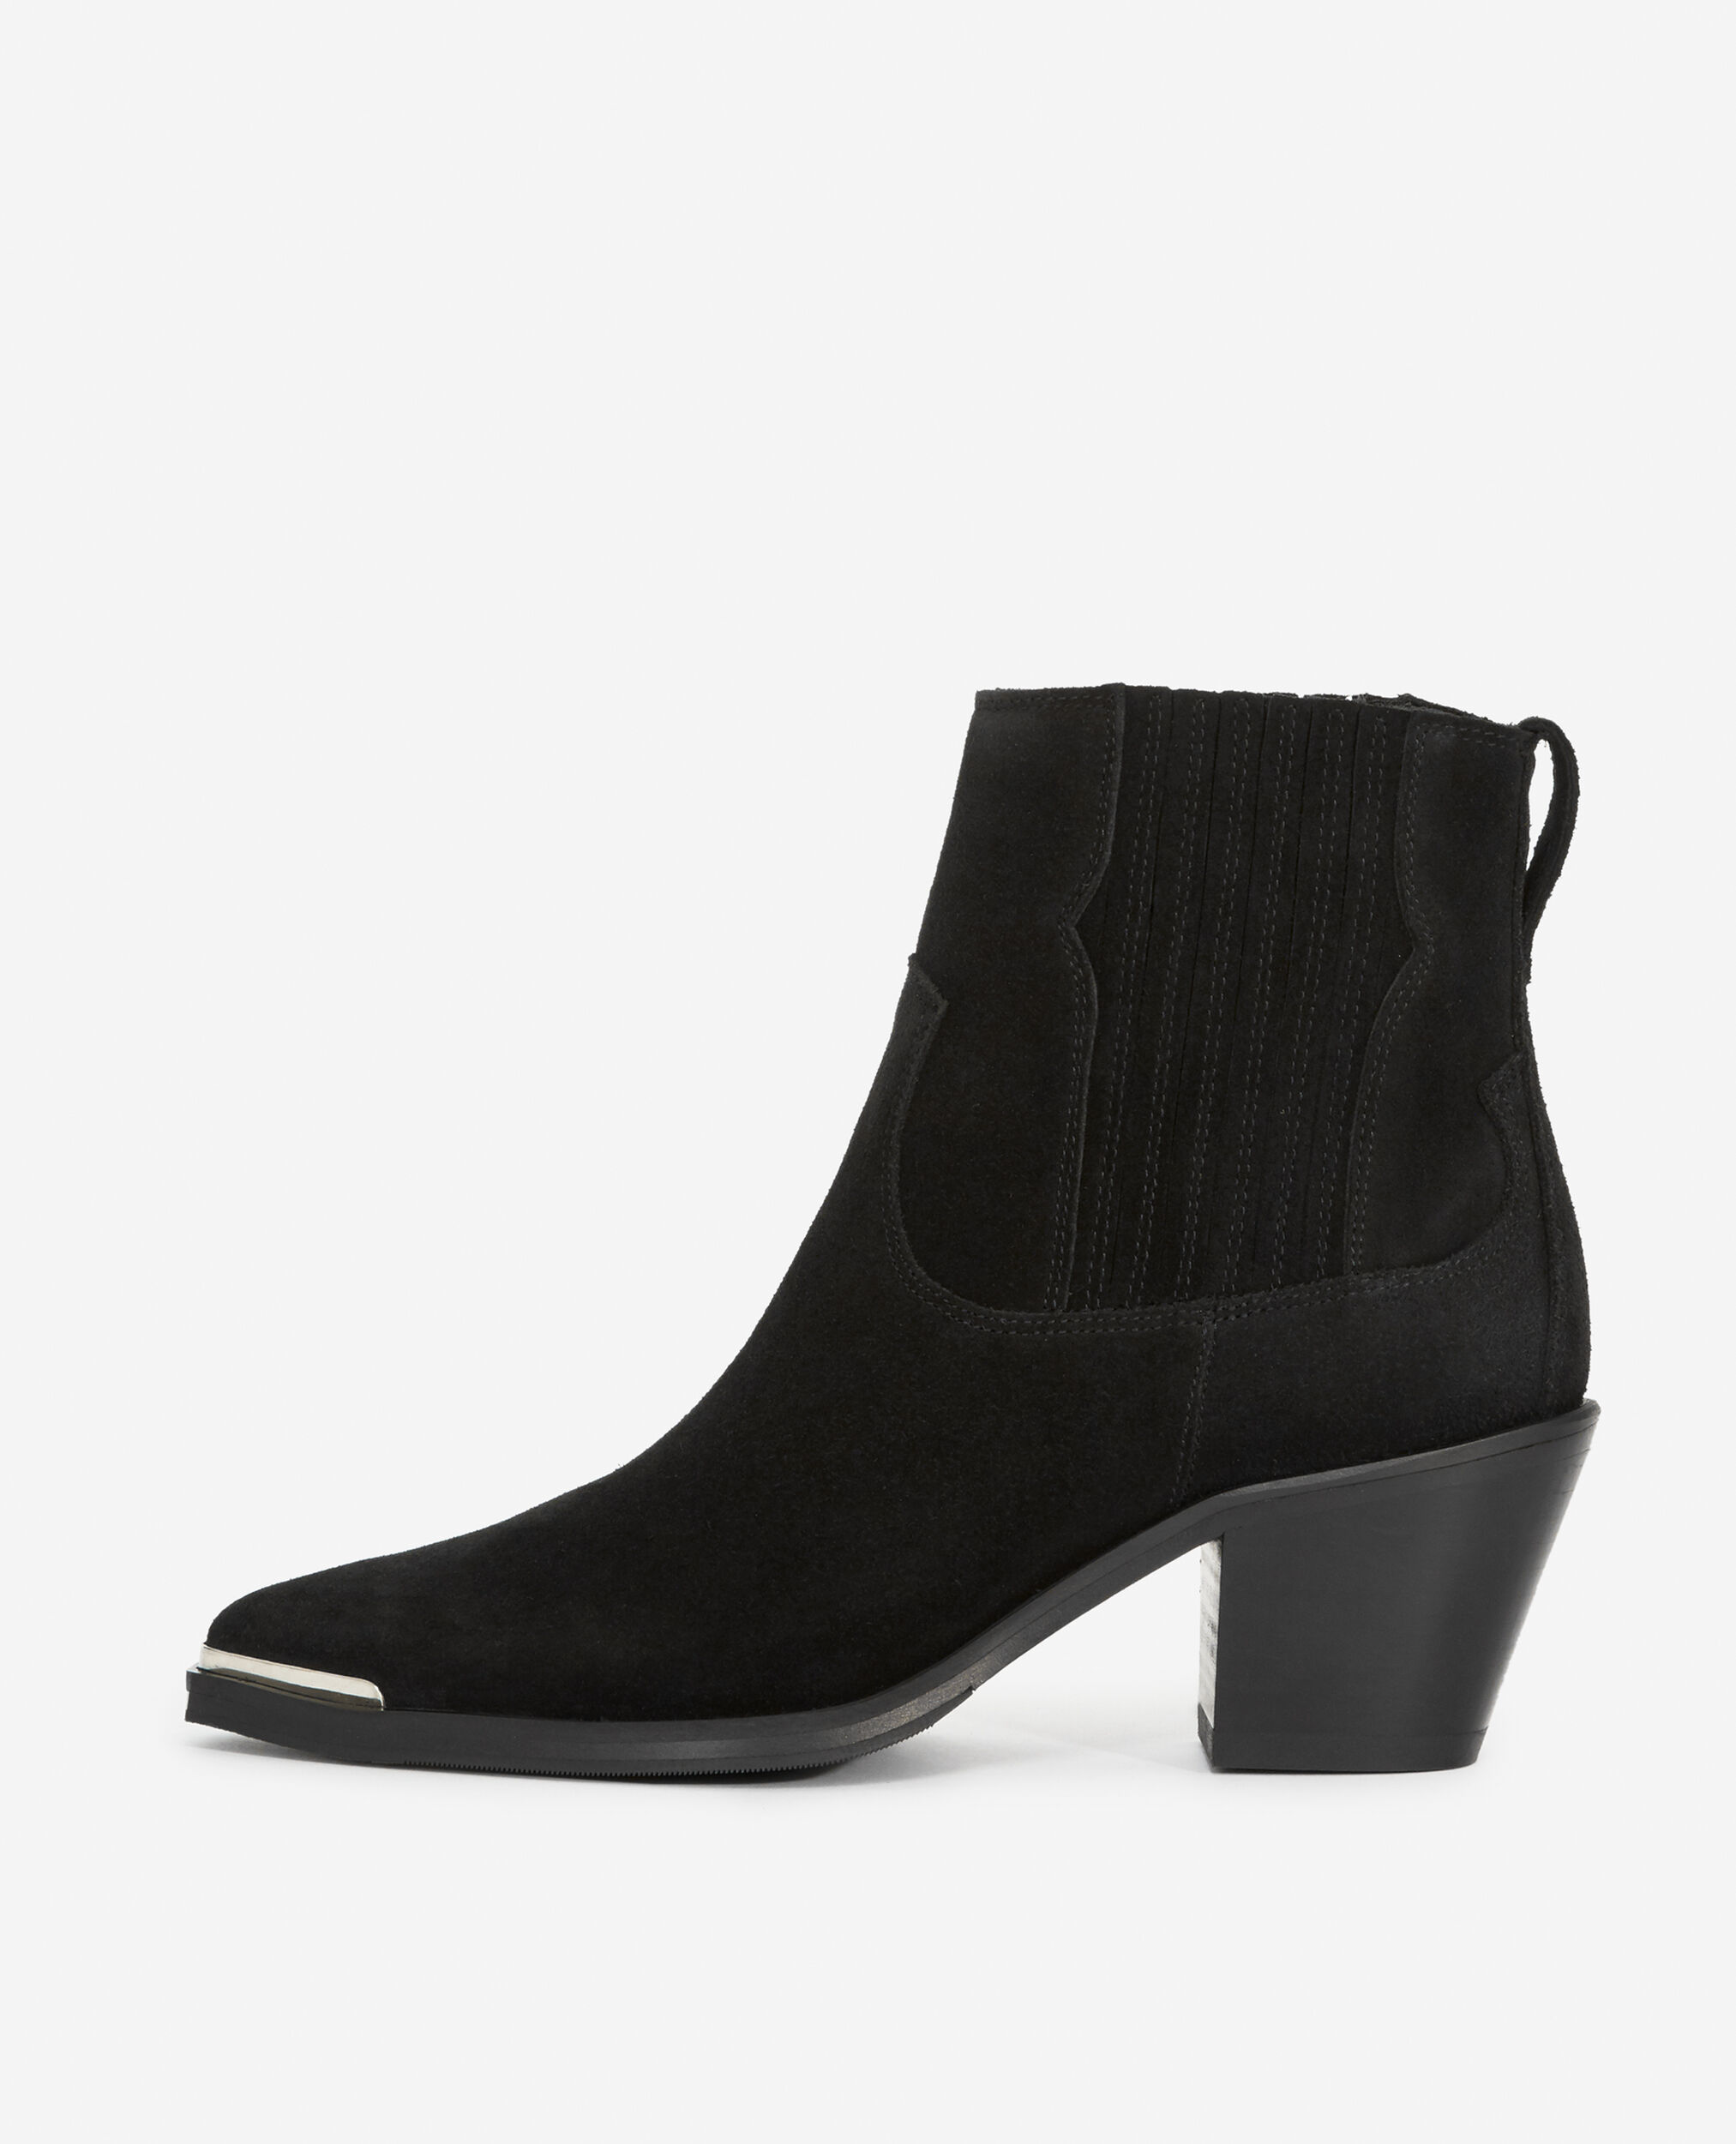 Western-style black suede ankle boots, BLACK, hi-res image number null